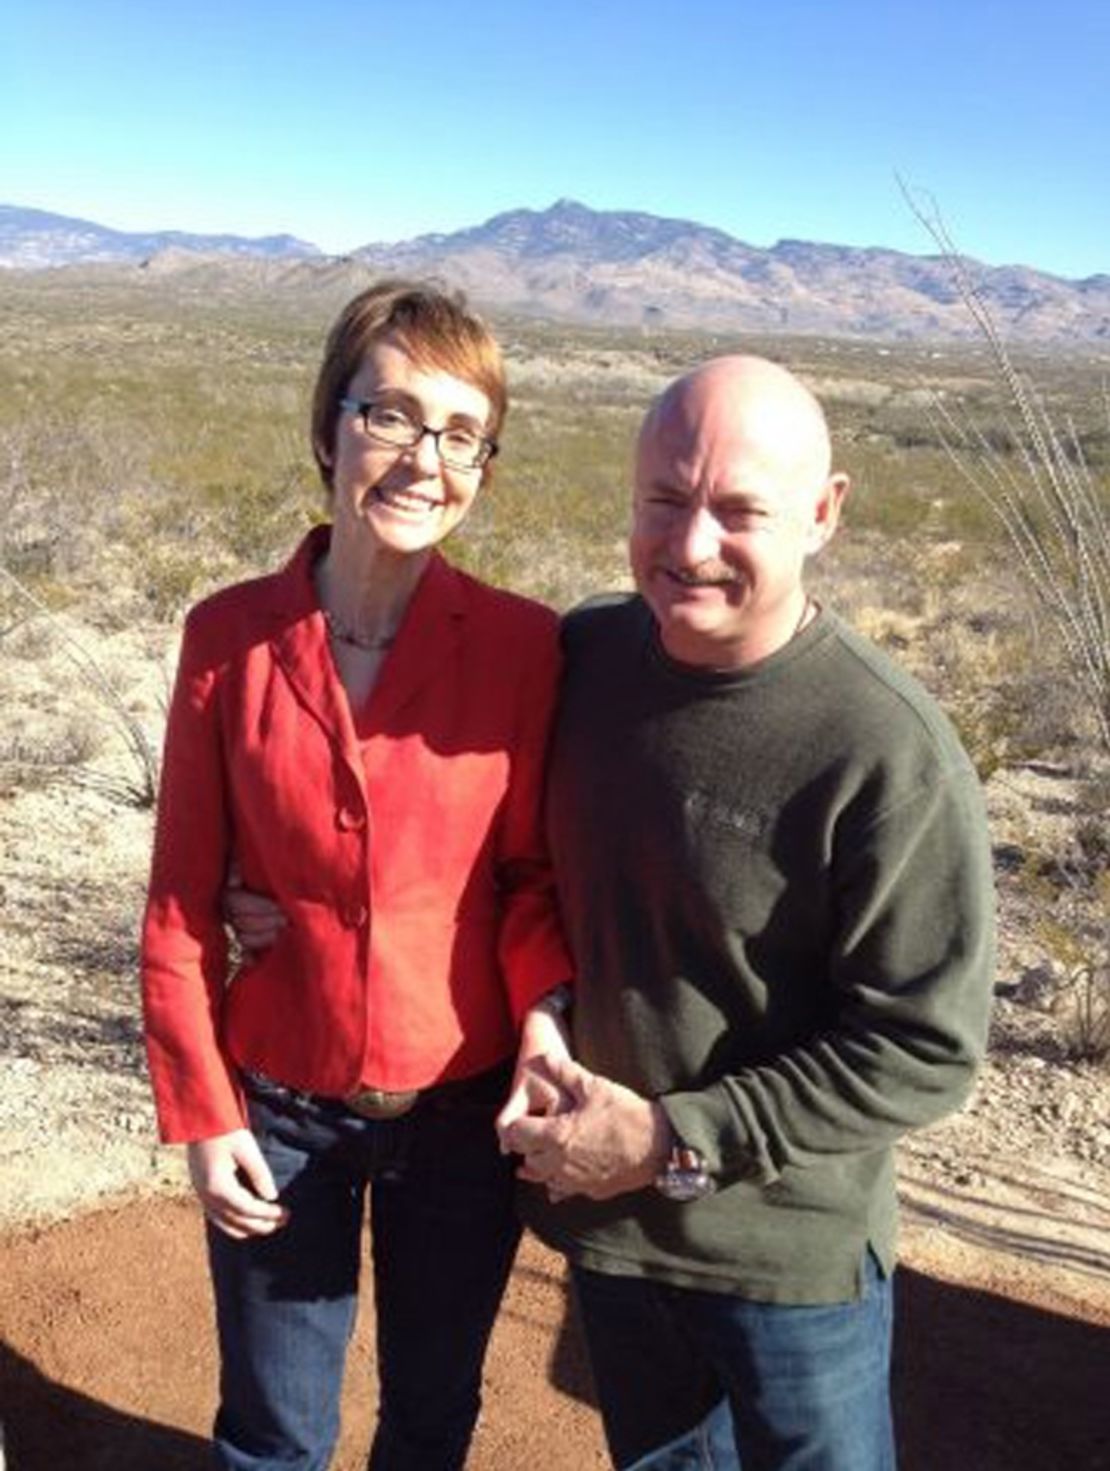 Giffords and Kelly last week in Tucson. The couple met in 2003 and married three years later.